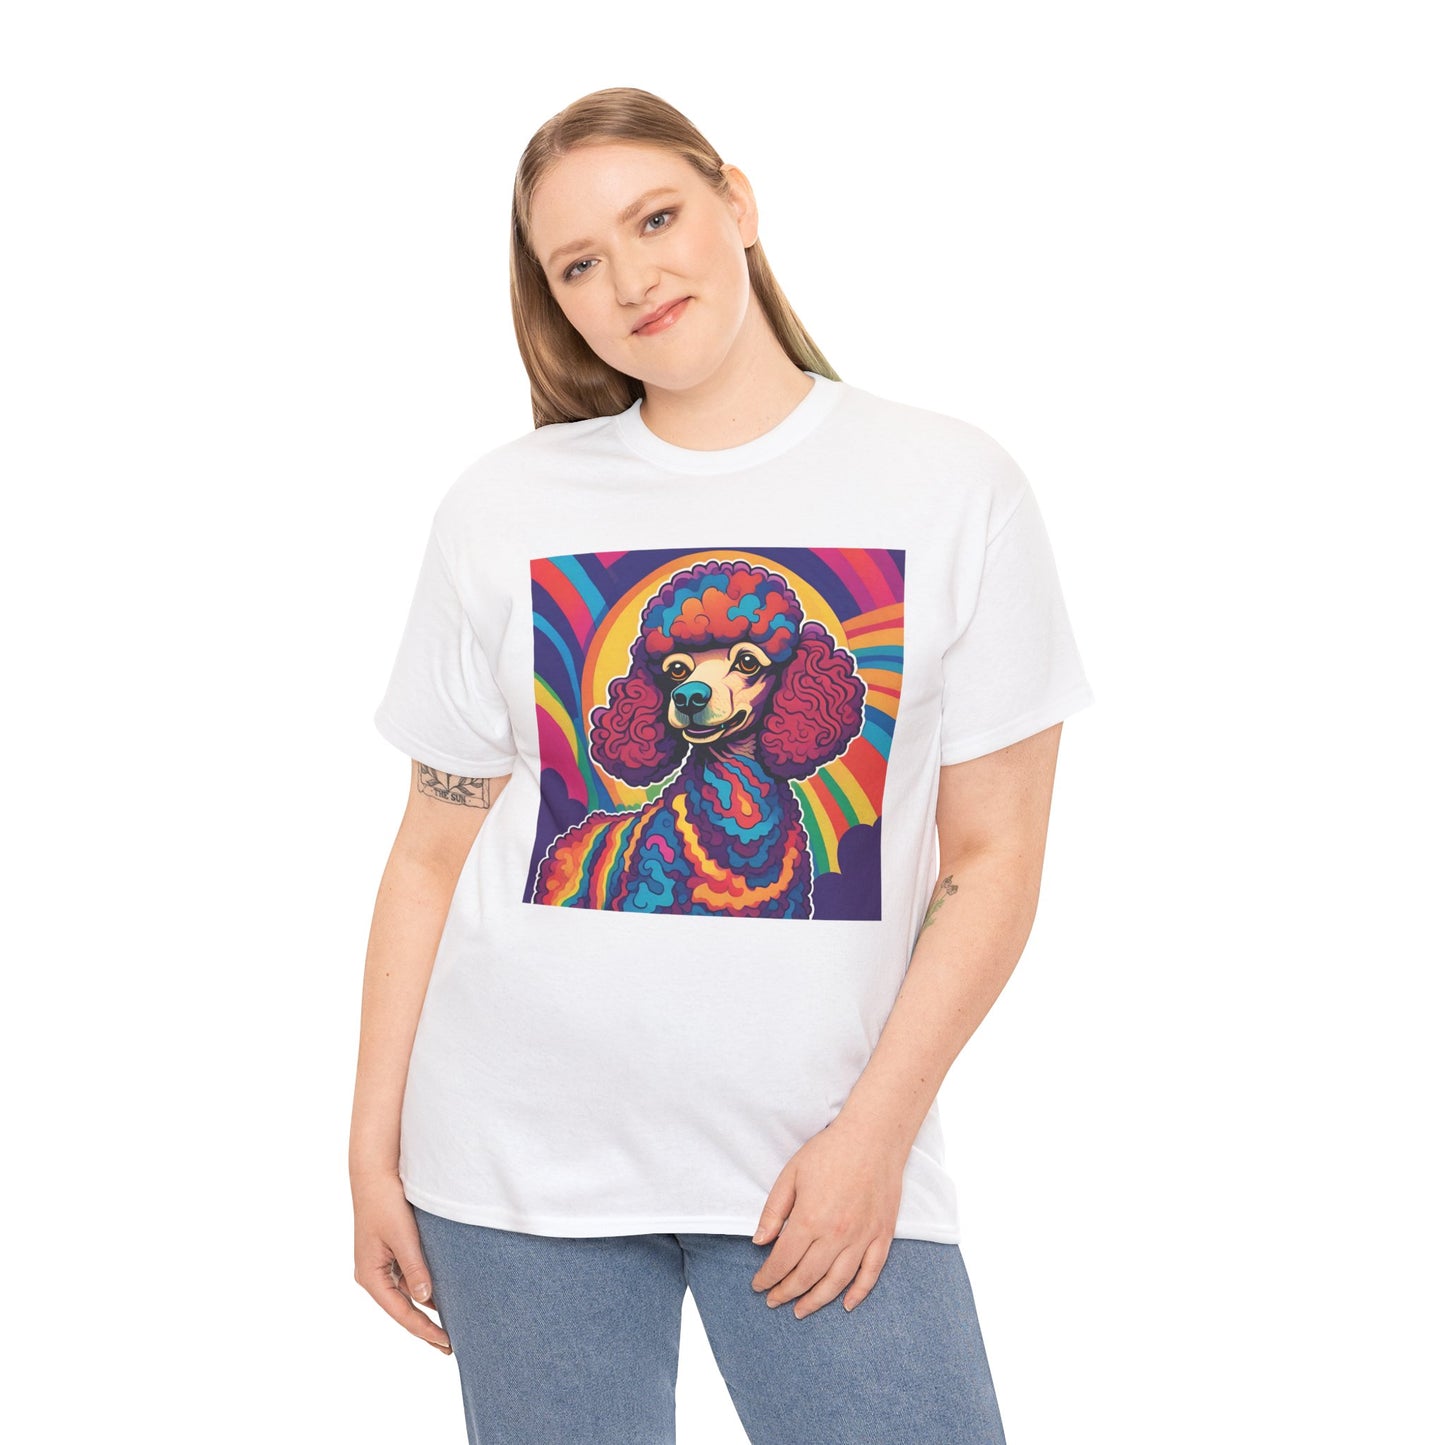 Psychedelic Poodle T-shirt